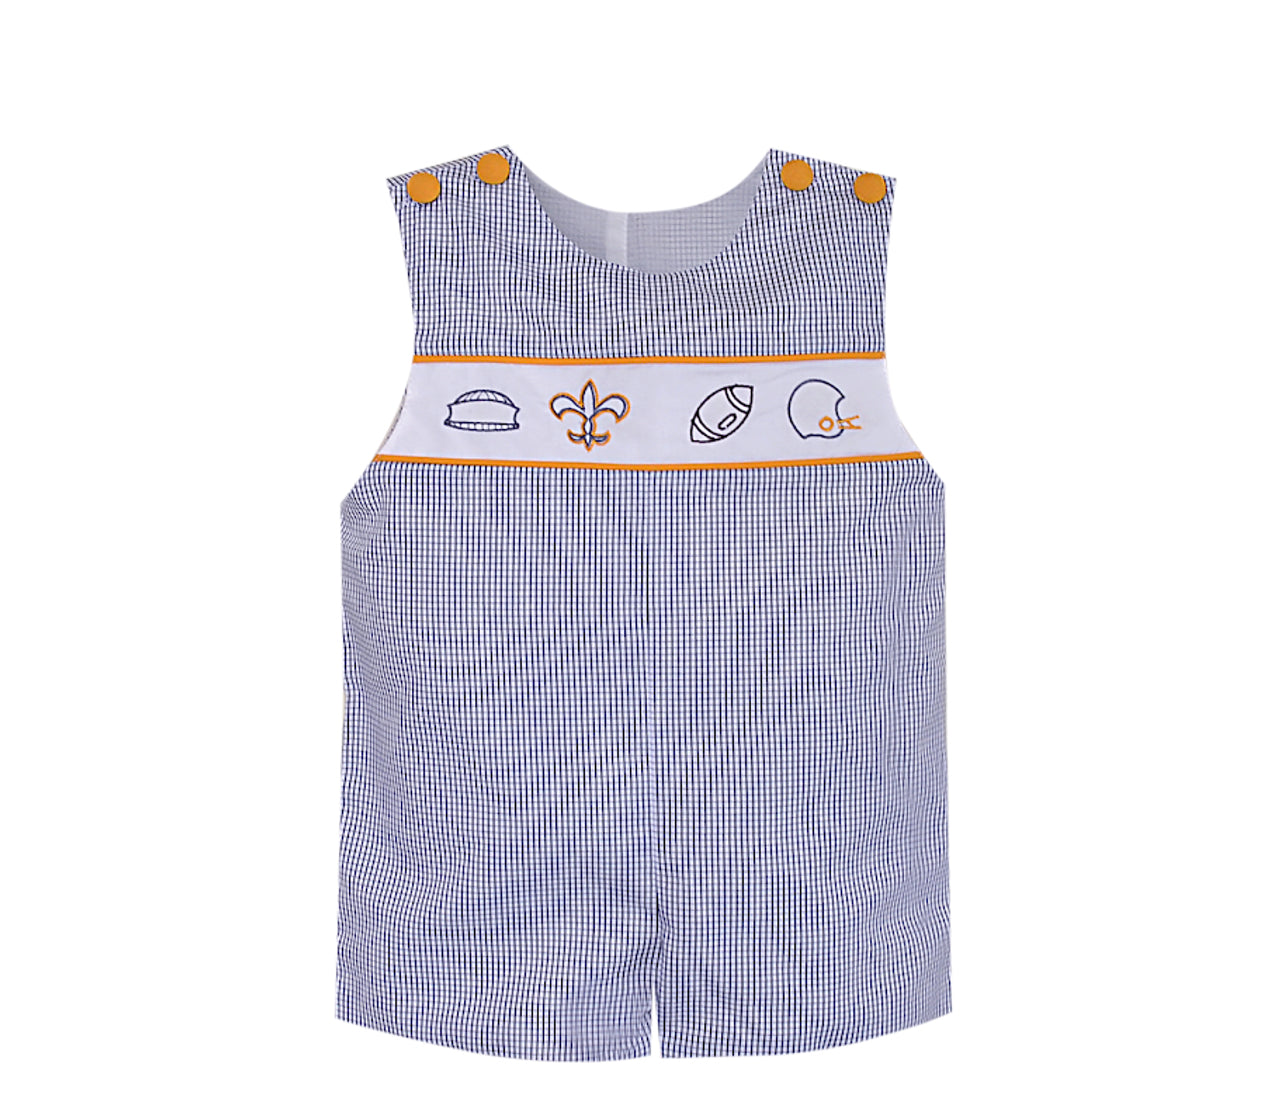 A baby boy's black gingham and orange smocked romper, the Embroidery Shortall-Black Gingham by Remember Nguyen.